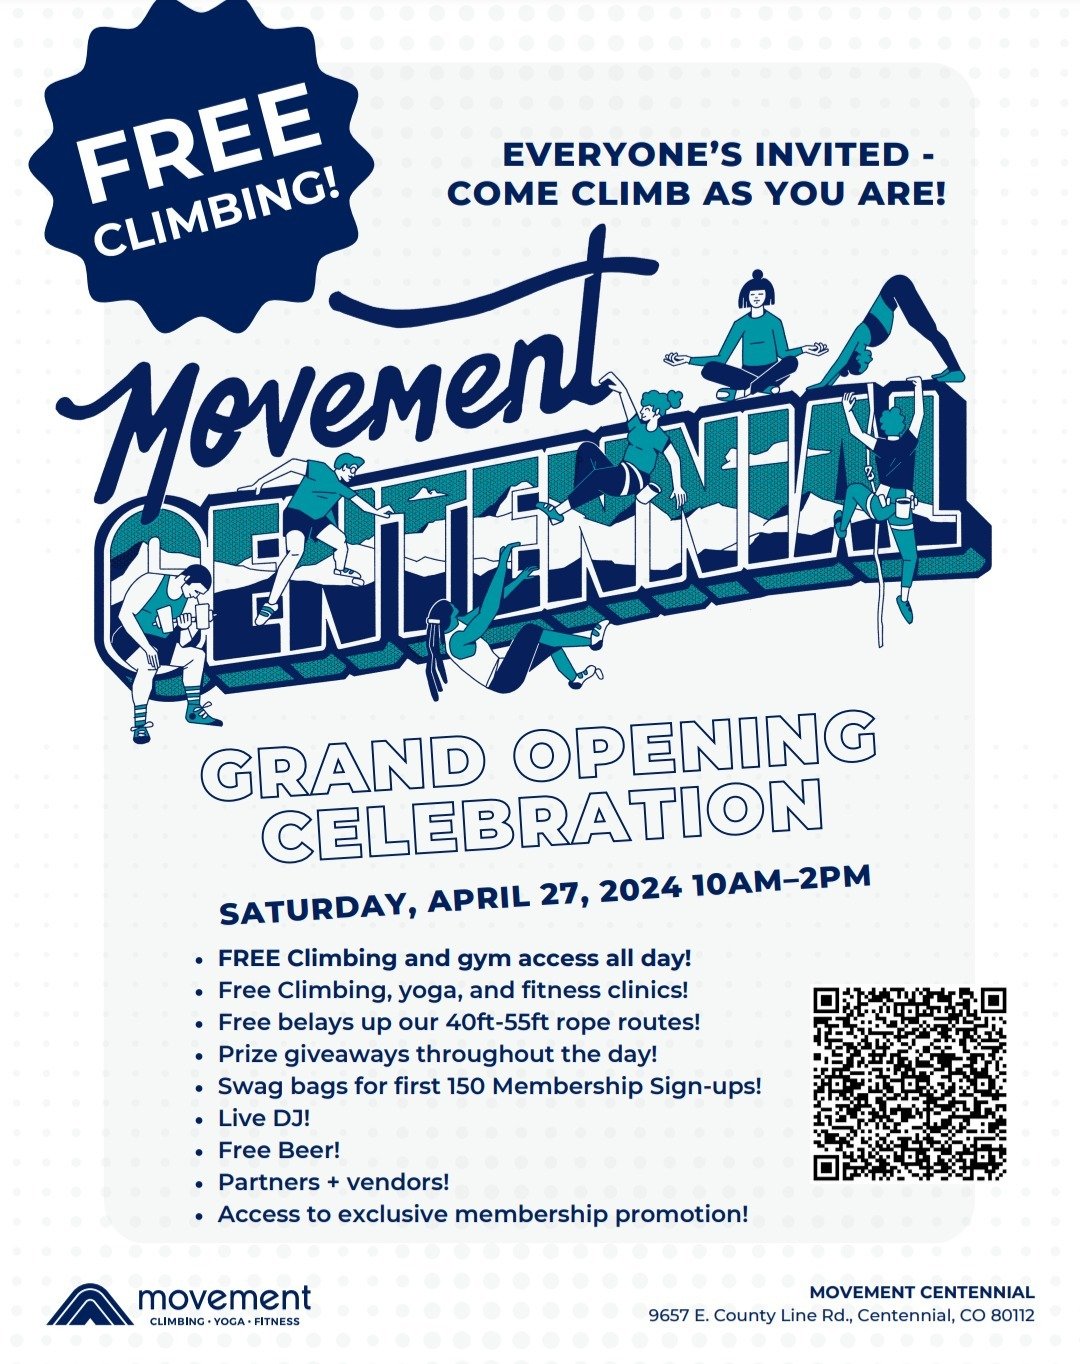 Free climbing at a brand new gym? Join us as we celebrate the grand opening of @movementgymscolorado Centennial on Saturday, April 27th. We'll be tabling so come say hello and ask us about our work!

Also featured that day:
- Prize giveaways througho